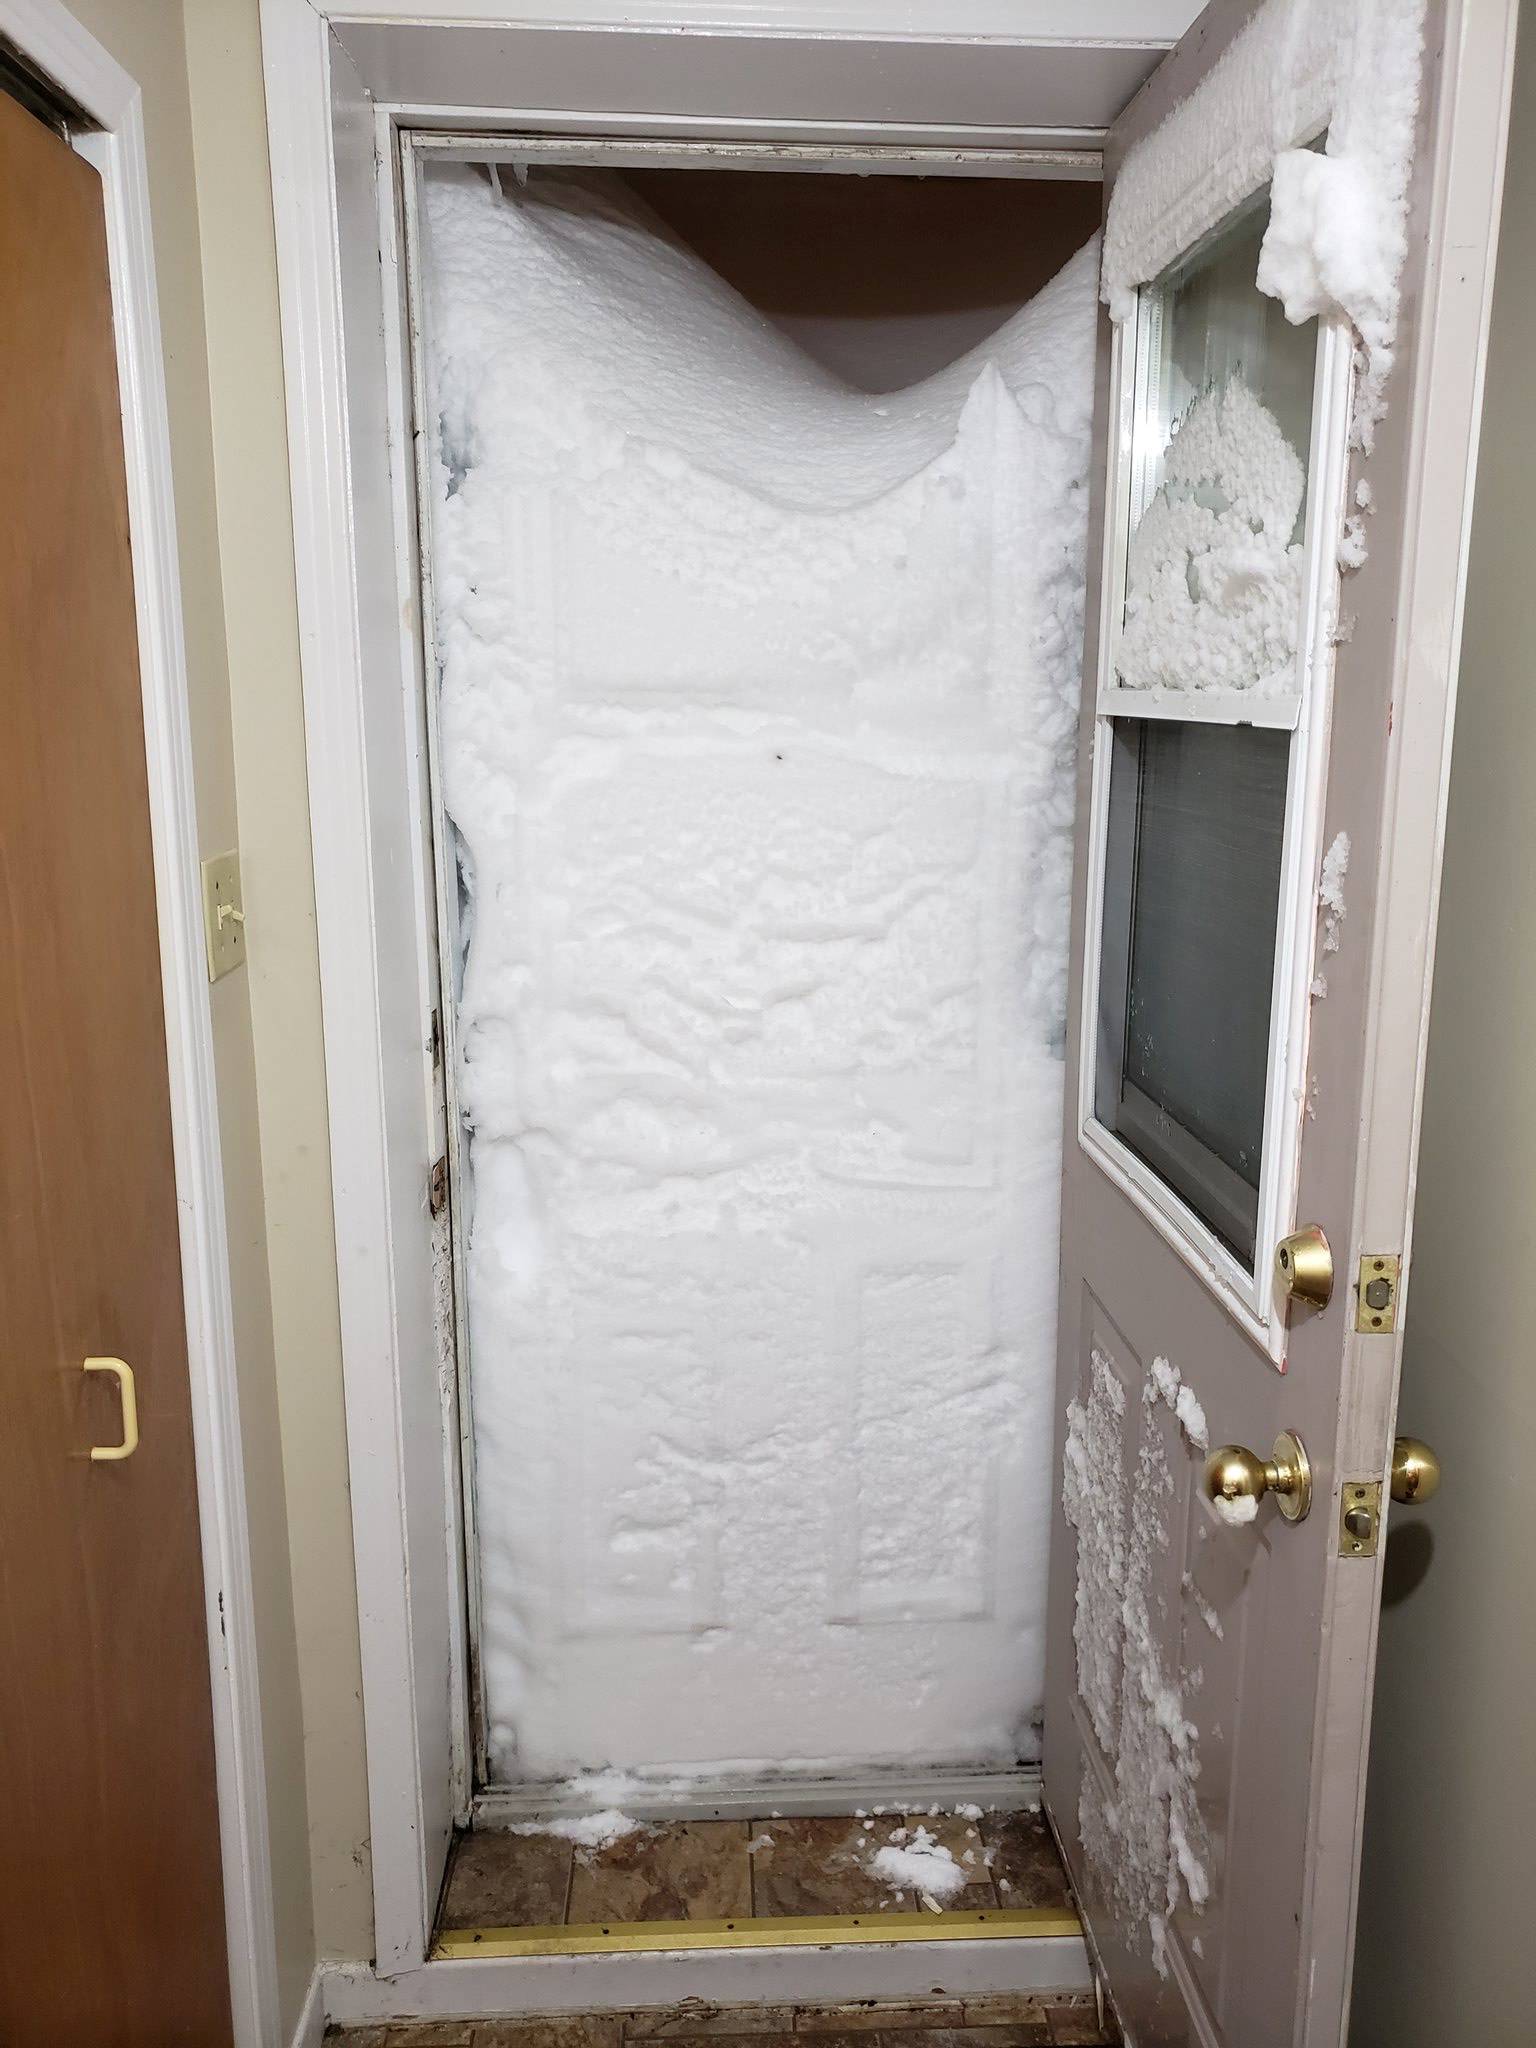 Snow blocks the entrance to an apartment in St Johns, Newfoundland